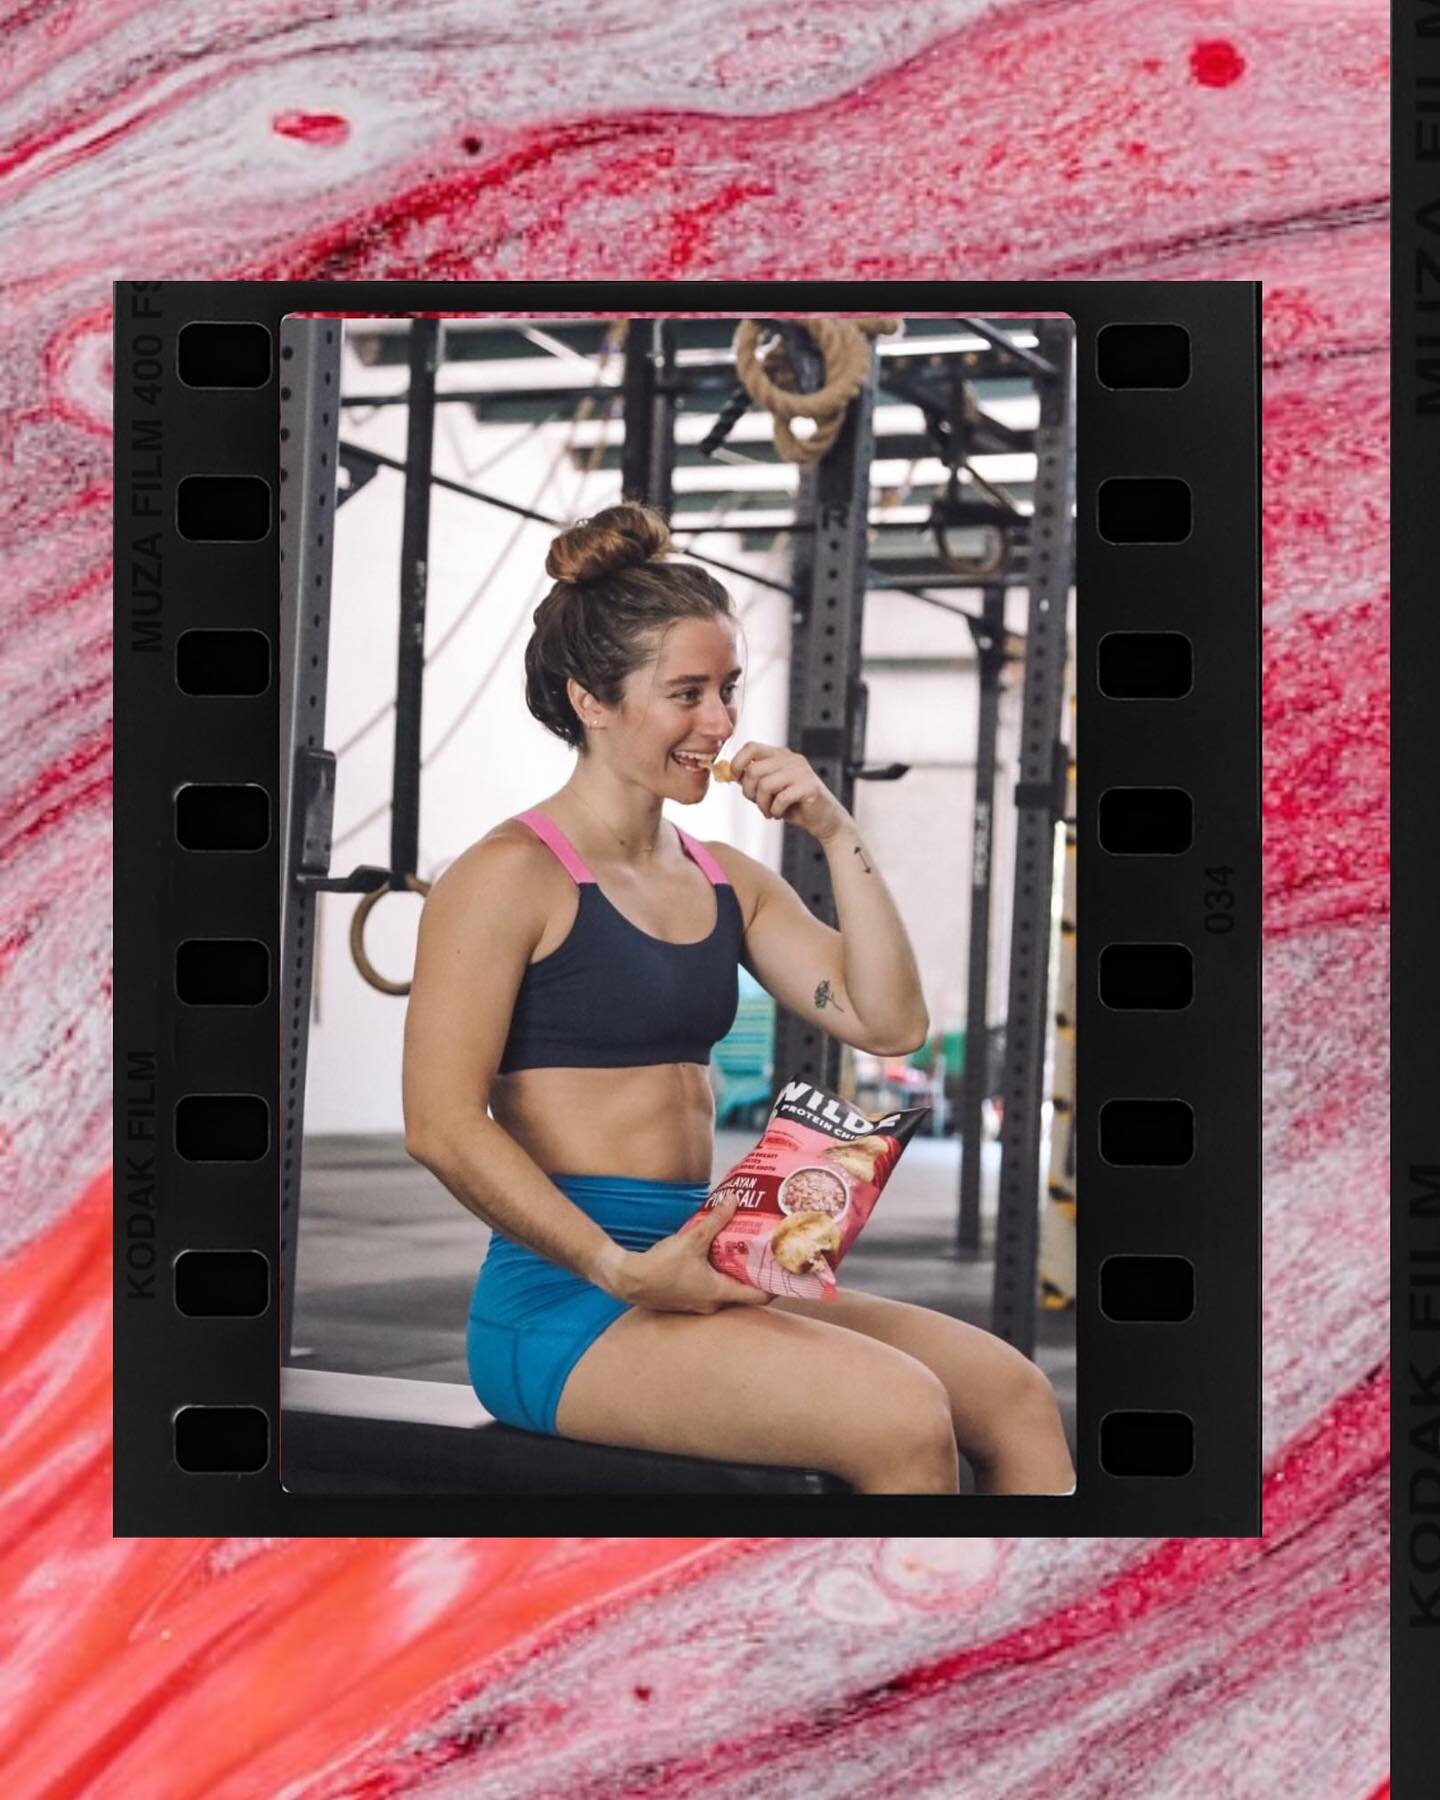 Snack time in the middle of a lifting session? 🏋🏼&zwj;♀️ Count me in 🙋🏼&zwj;♀️ 

Chips - @wildechips 
Photog - @ultra_mk_ 
Collage - @wearestagger 

#wildechips #wildechipspartner #crossfit #strength #lifting